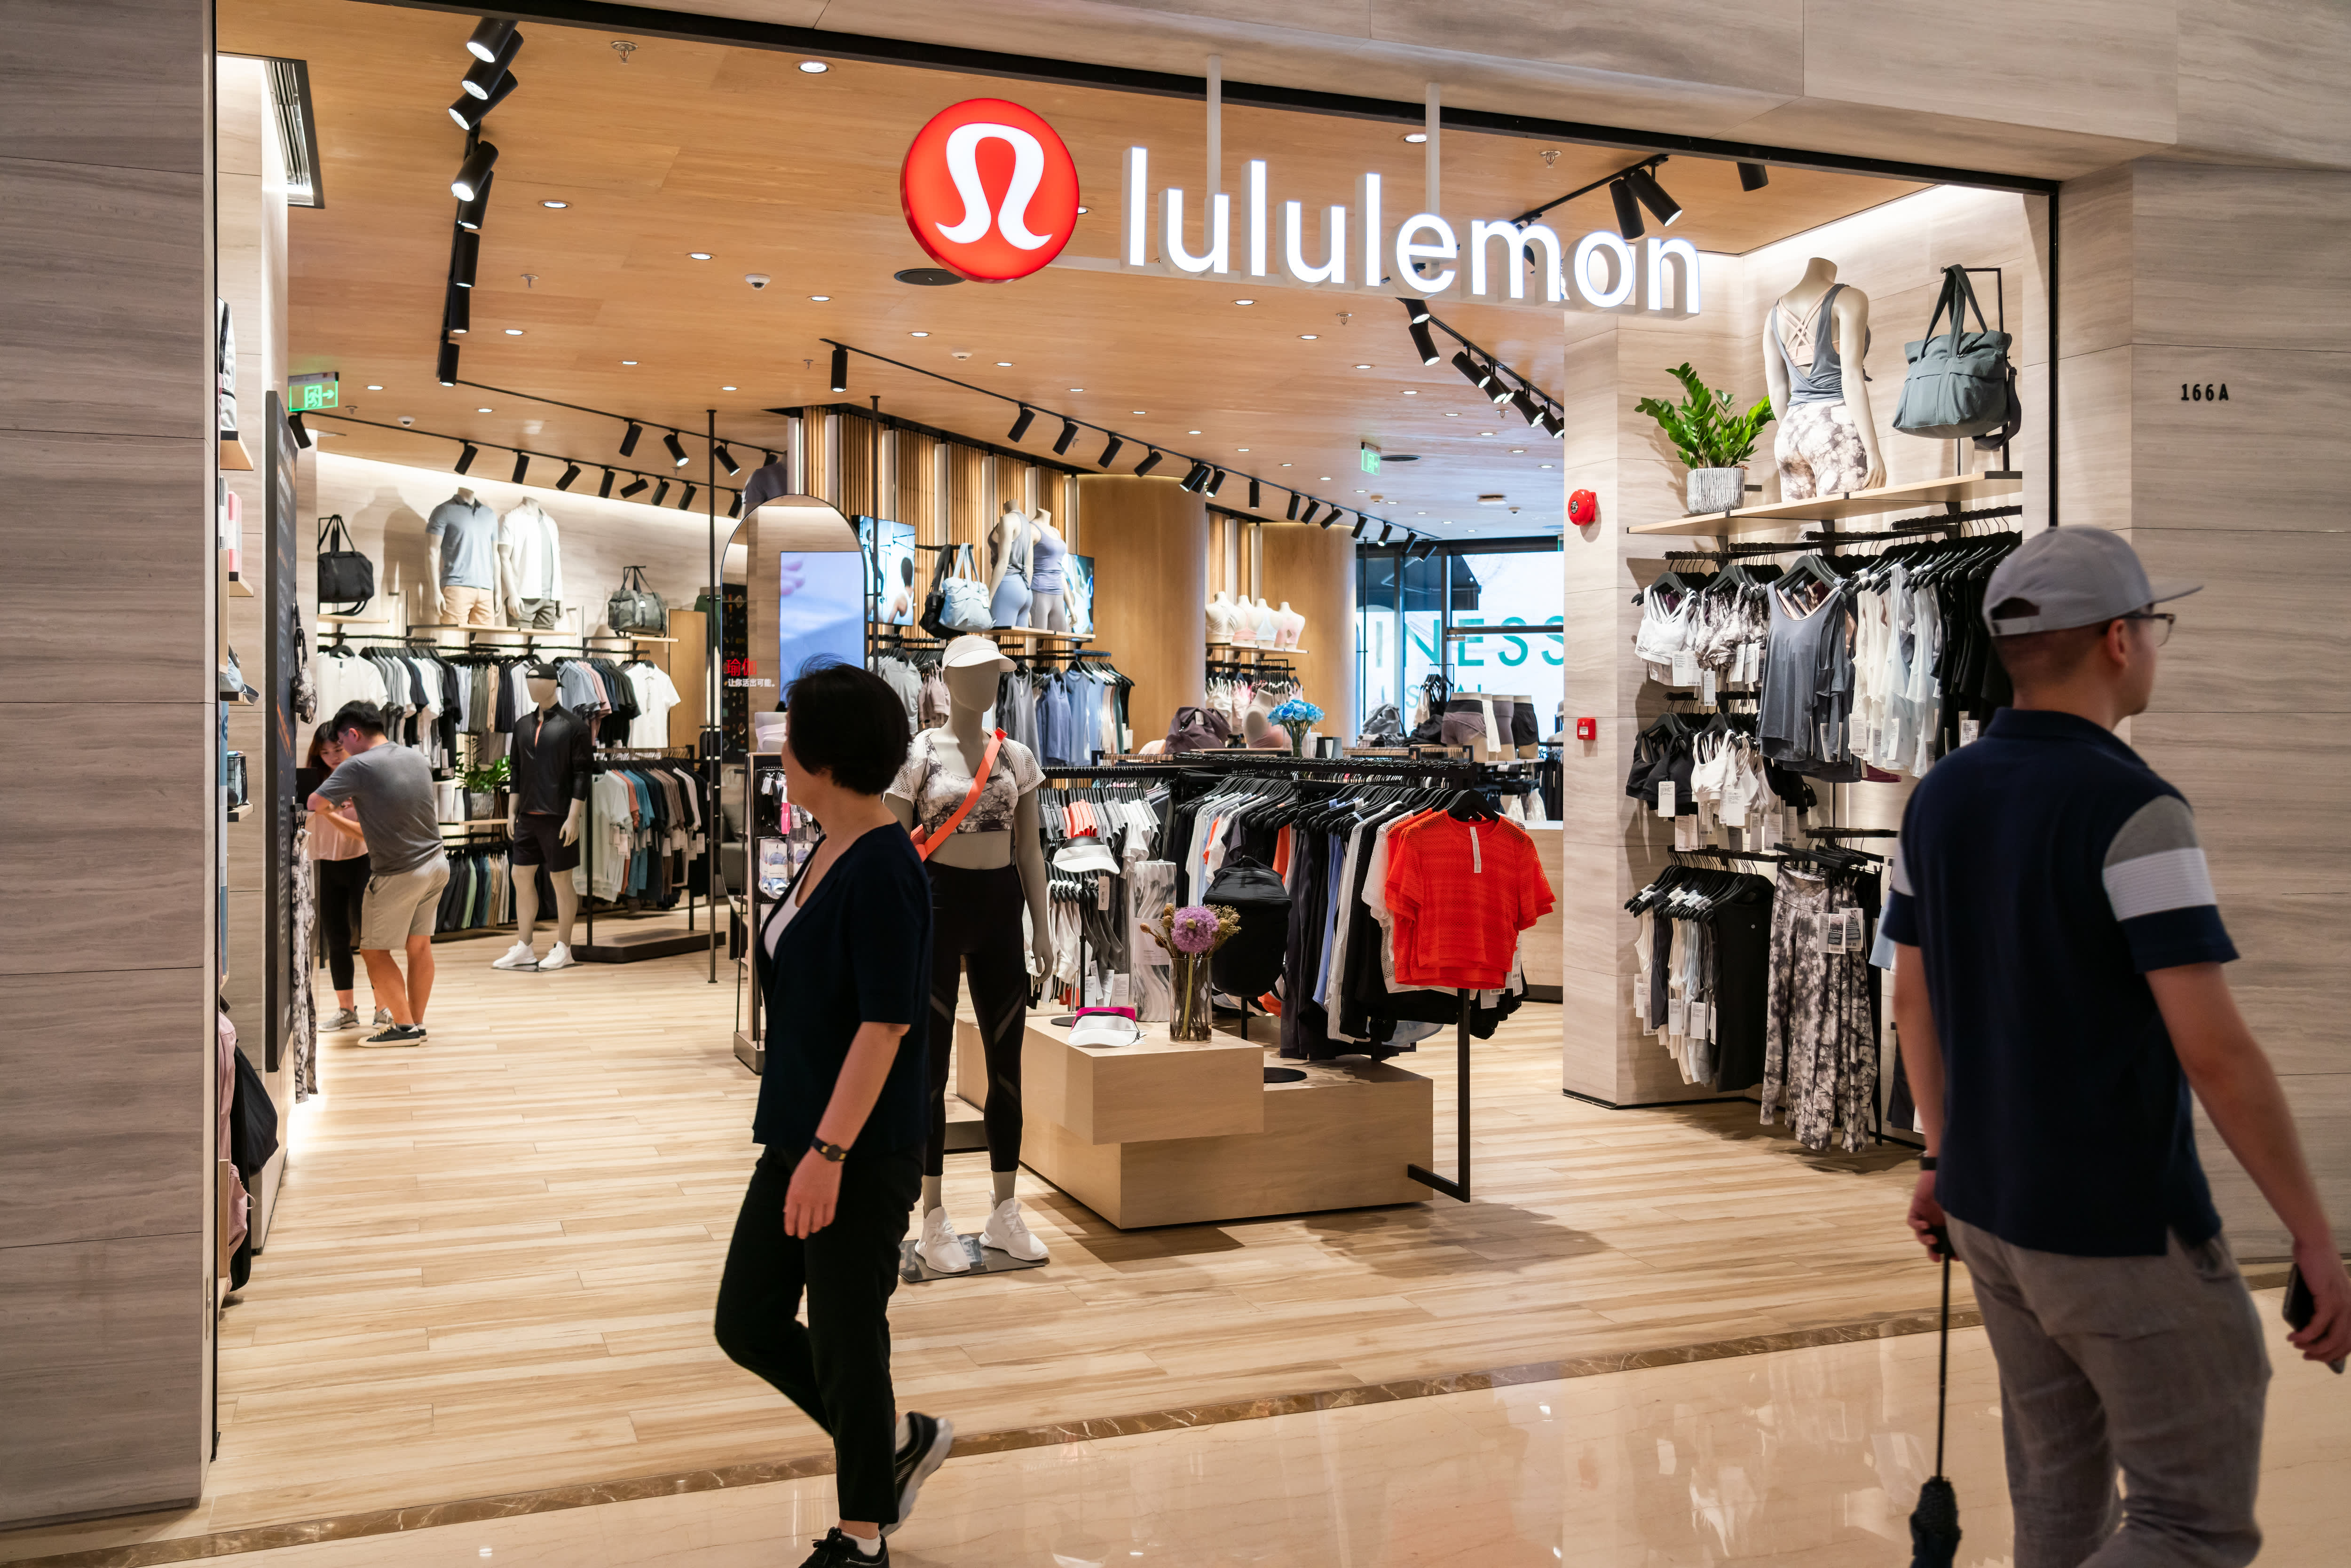 Lululemon shares on pace for all-time high after monster earnings report